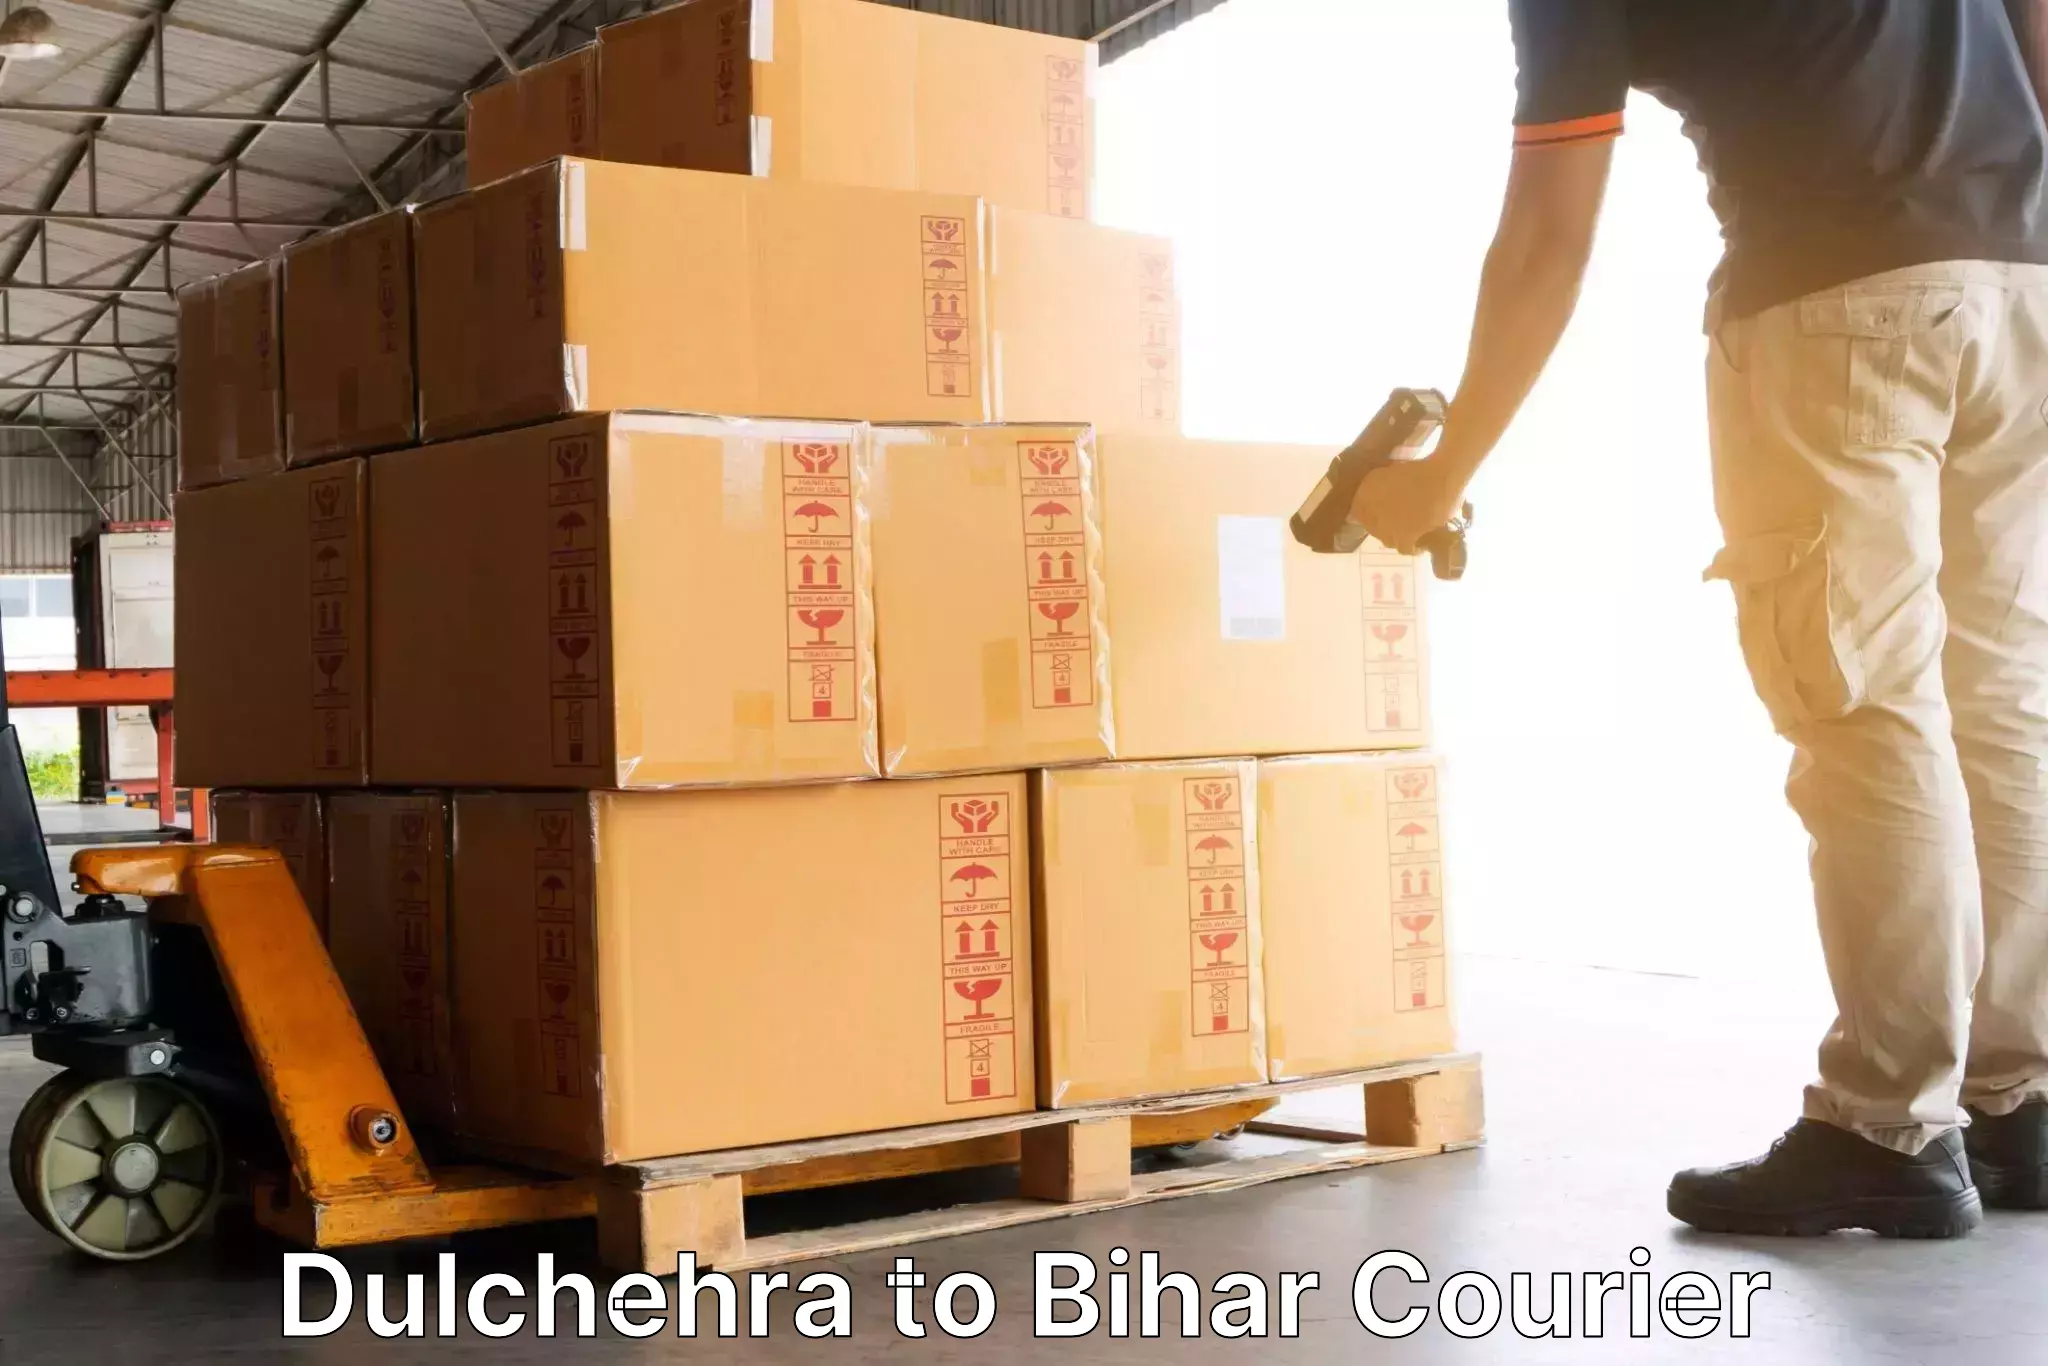 Reliable delivery network Dulchehra to Dholi Moraul